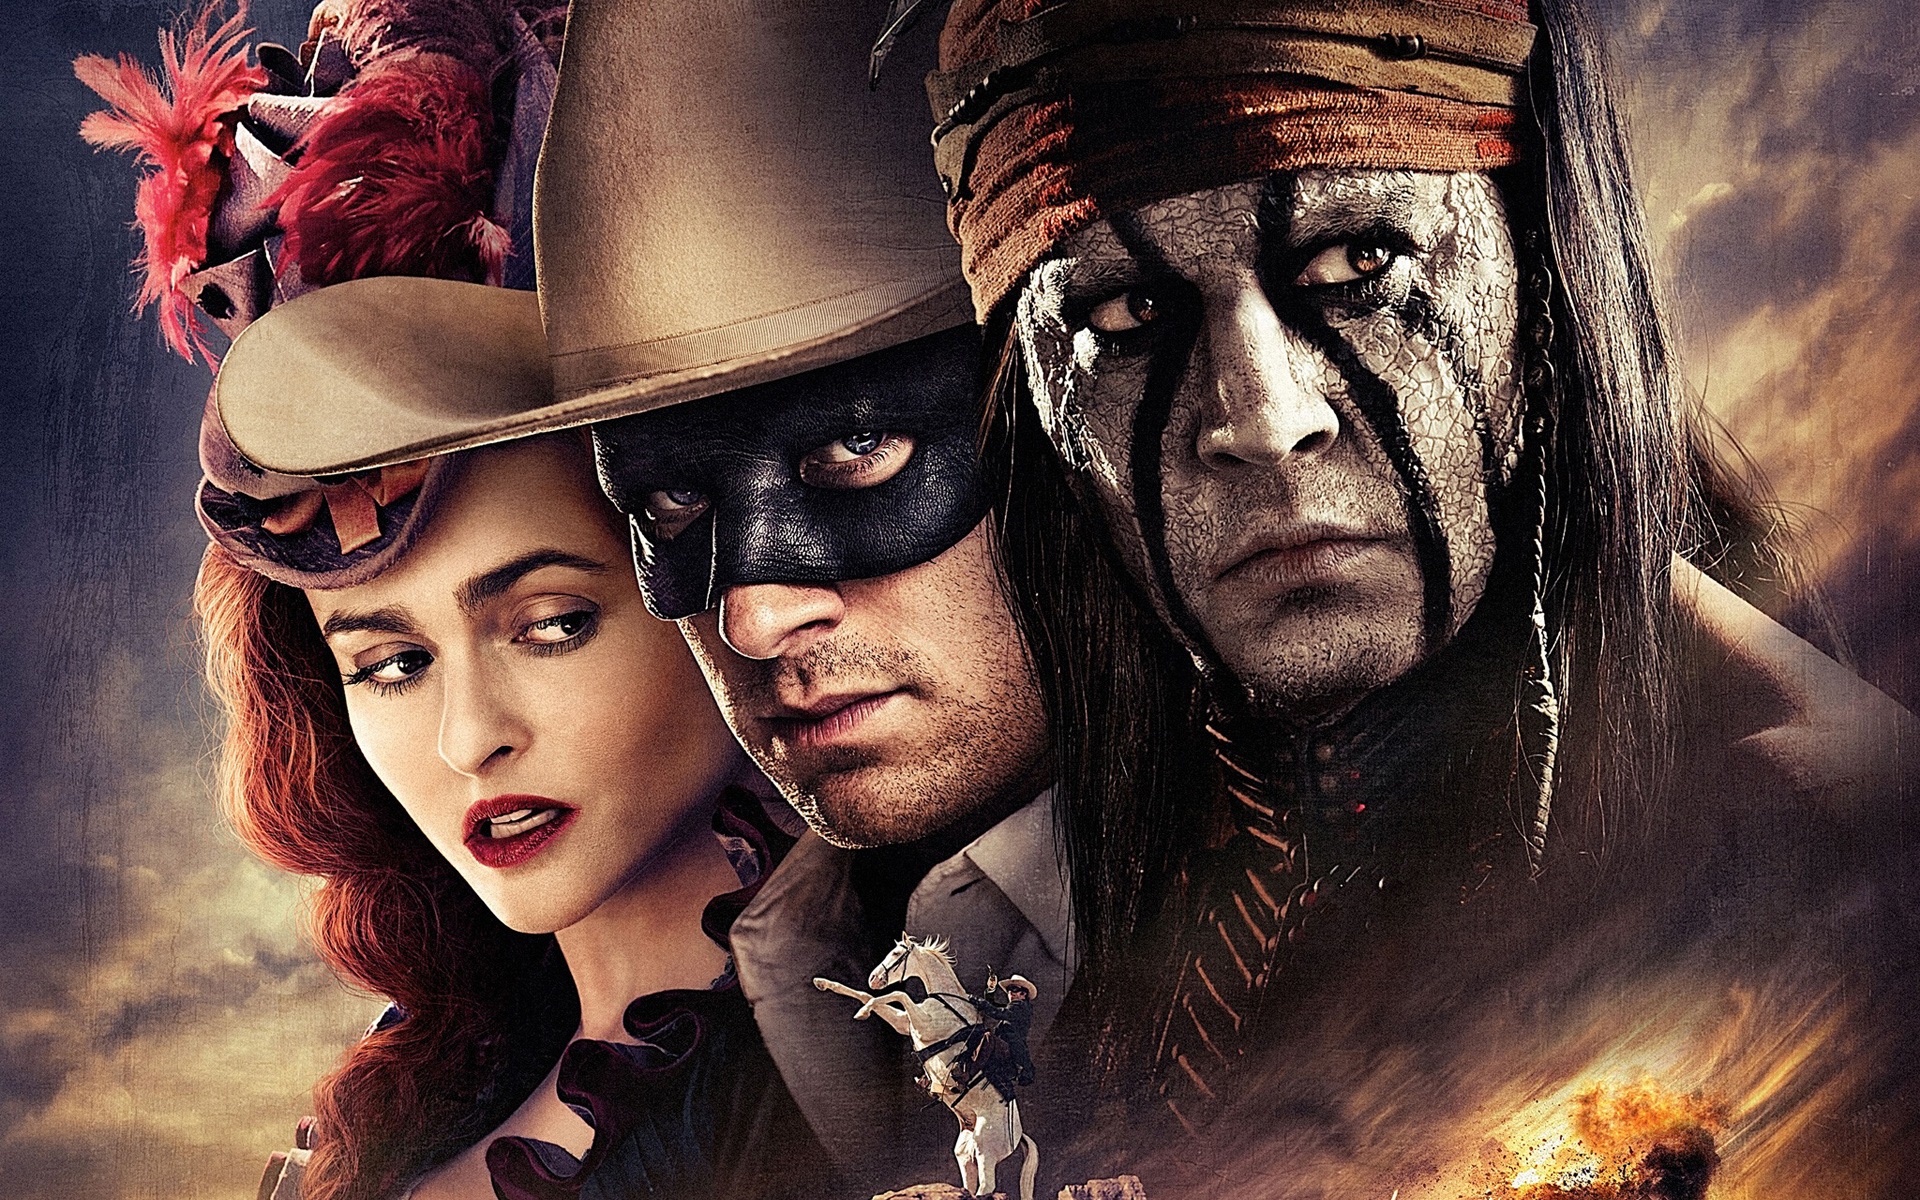 The Lone Ranger HD movie wallpapers #1 - 1920x1200